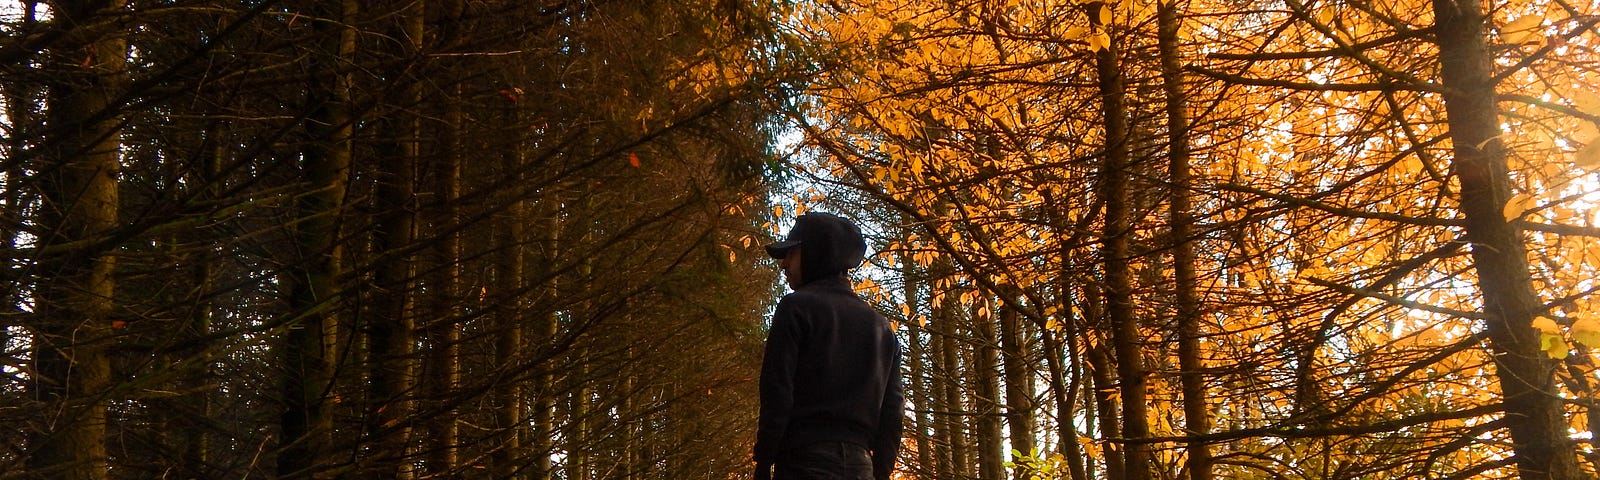 Cowboy silhouette in an Autumn forest